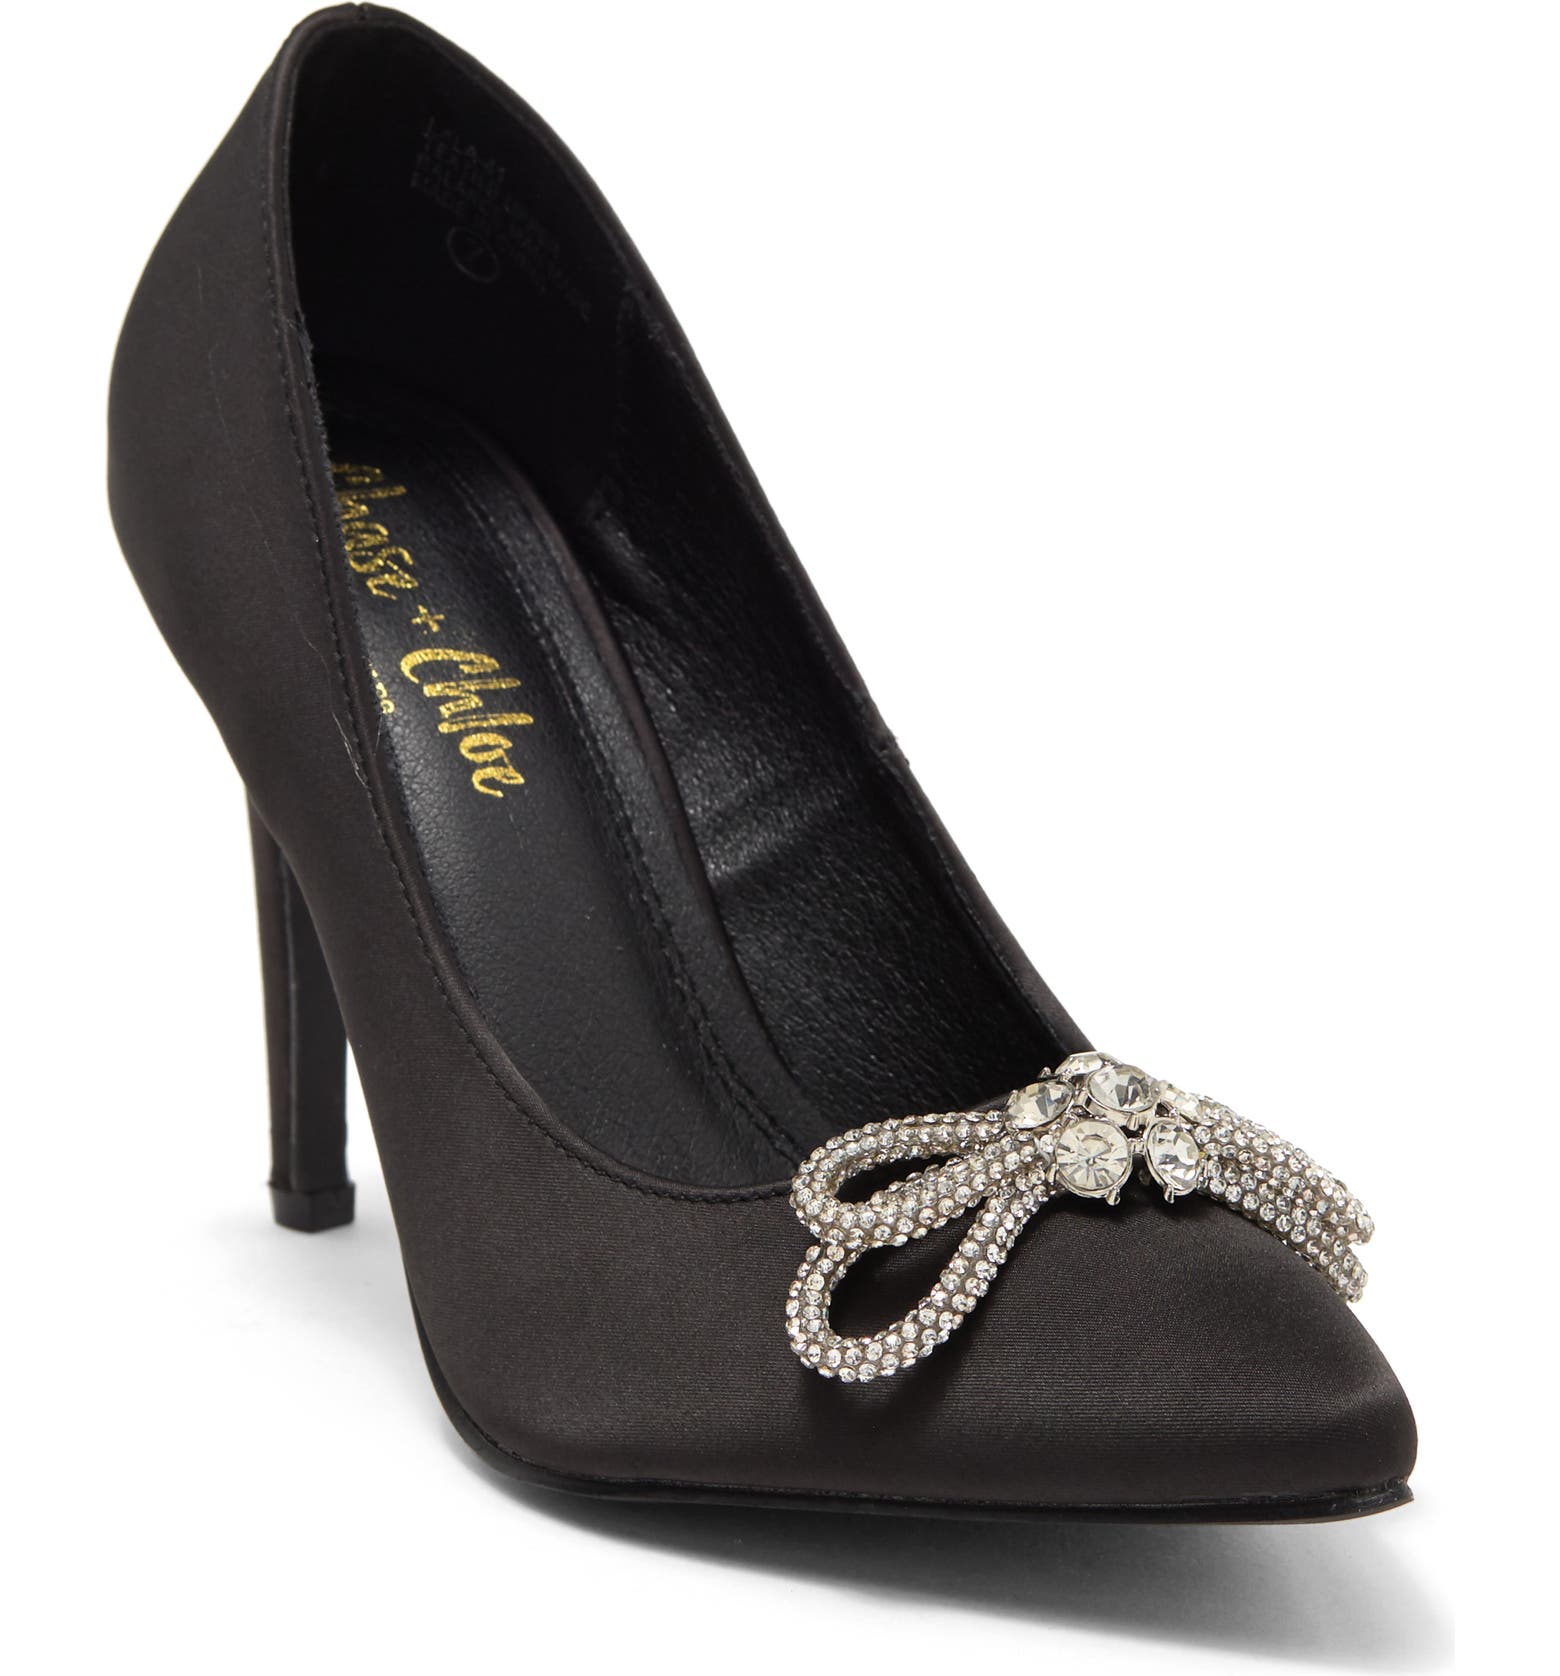 CHASE AND CHLOE Bow Rhinestone Pump | Nordstrom